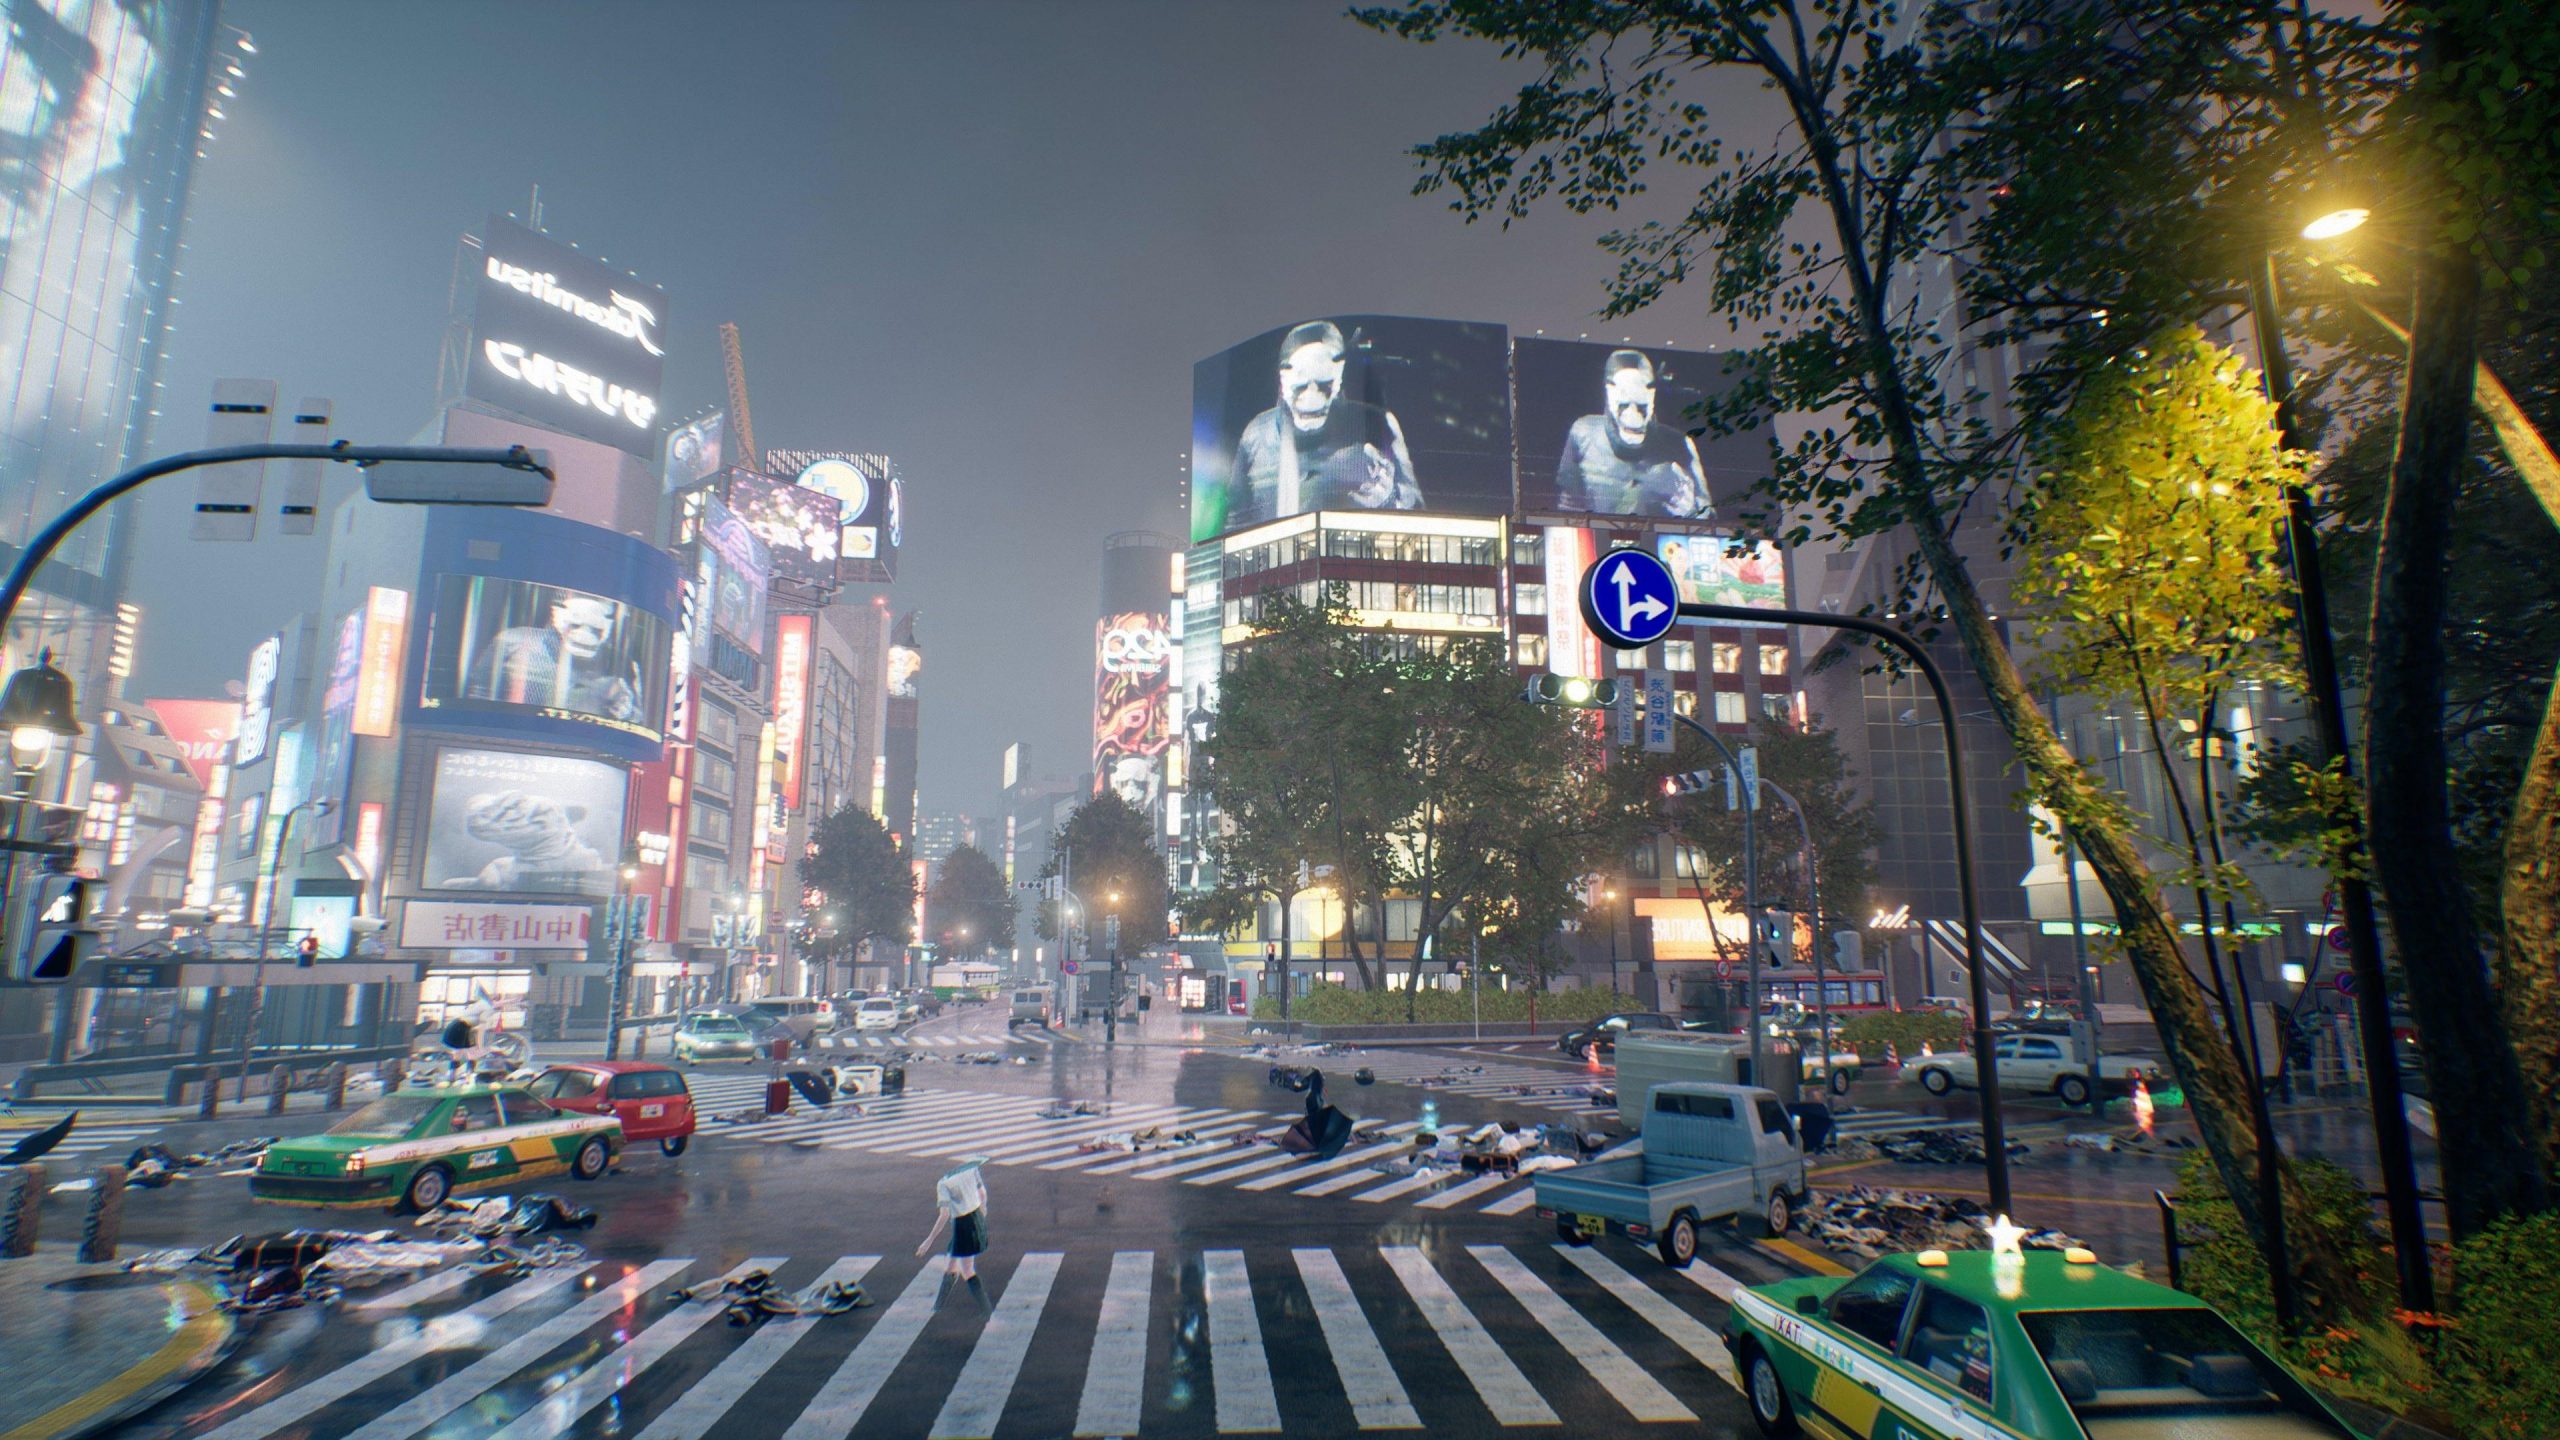 Ghostwire: Tokyo is exactly what you're expecting